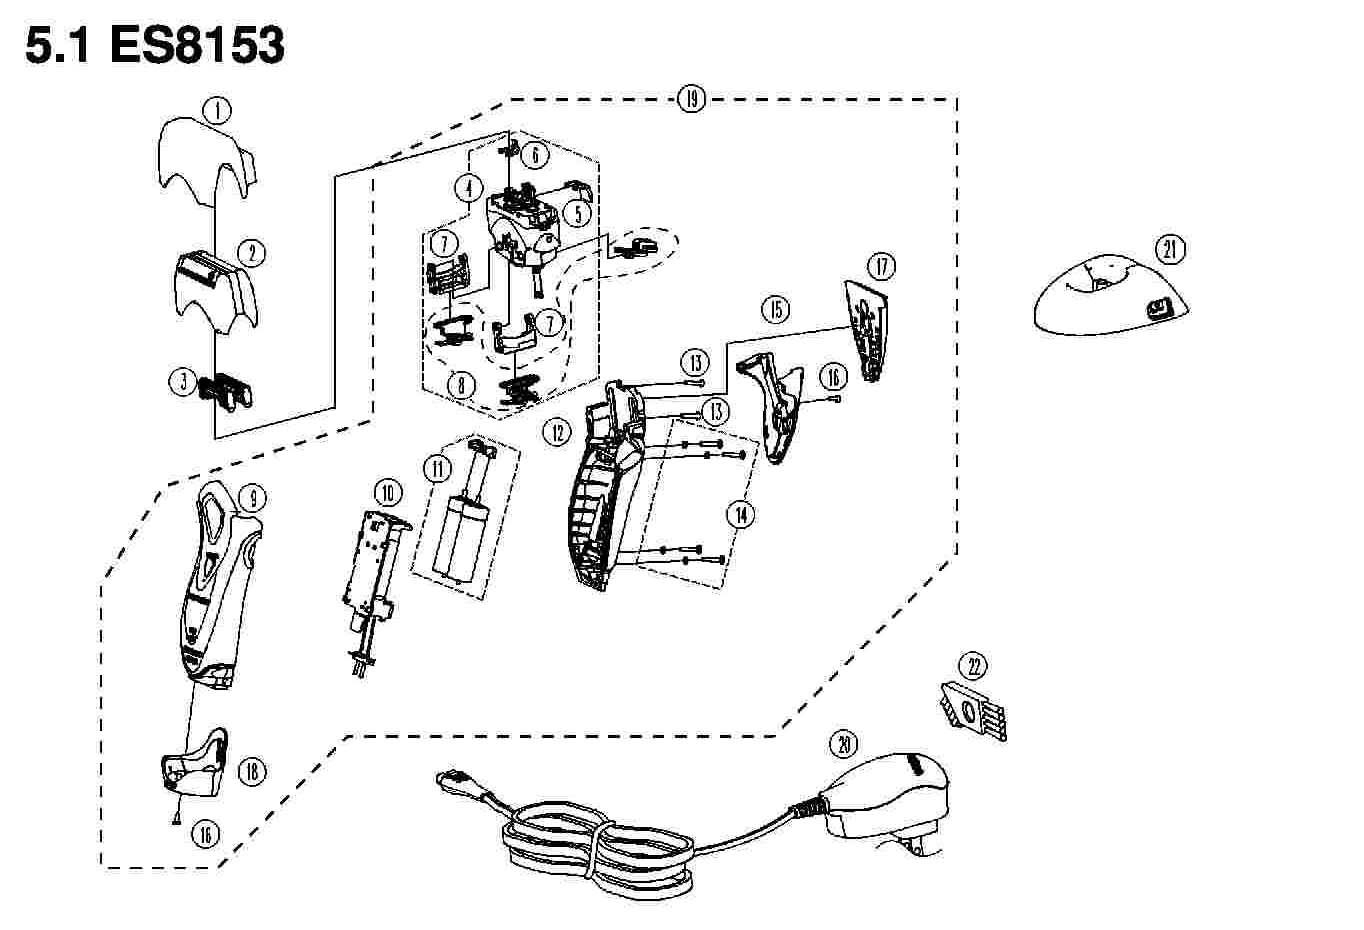 ES-8153Z3: Exploded View